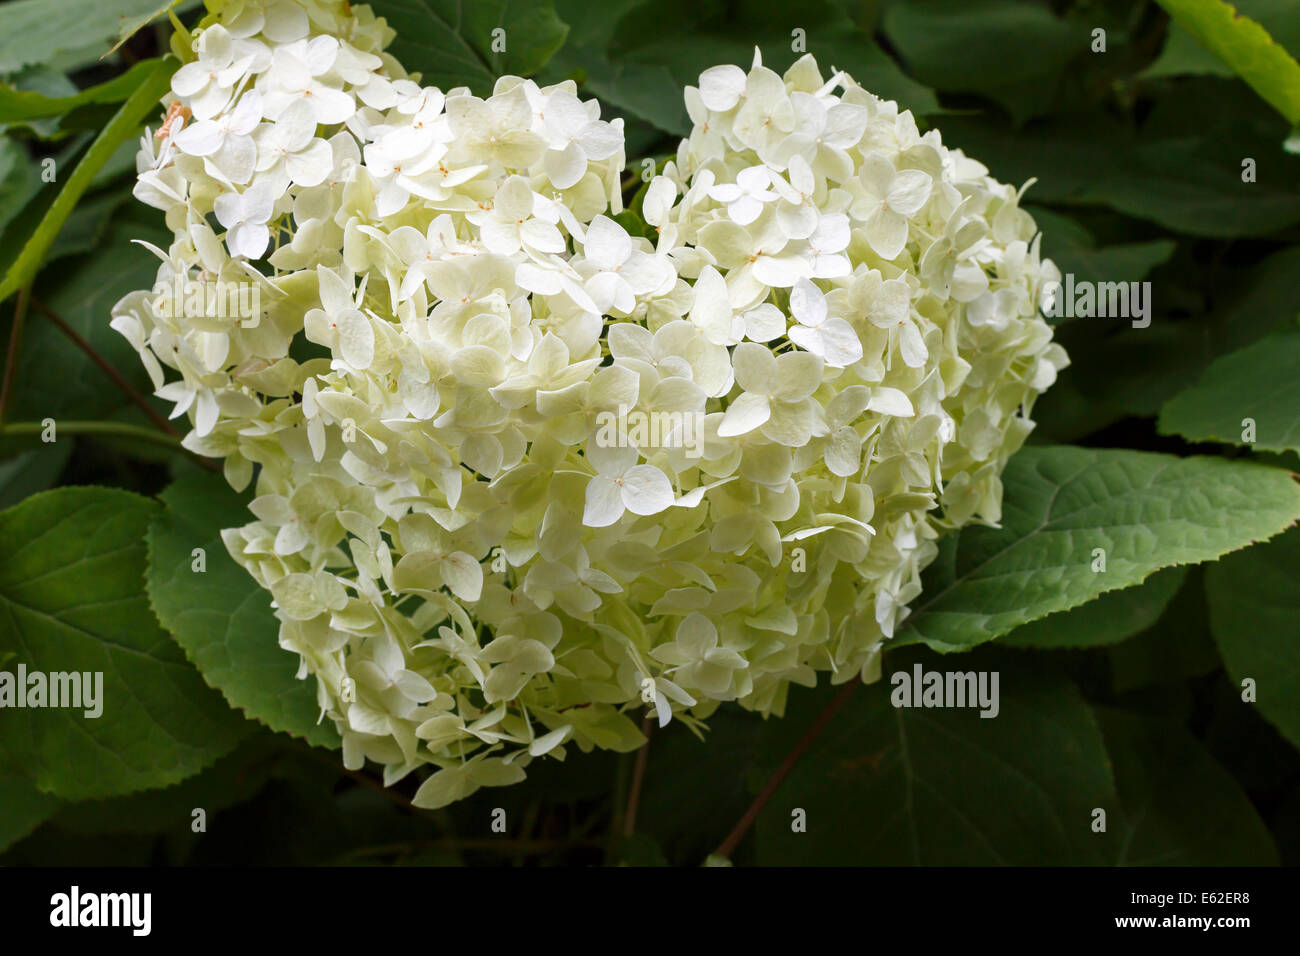 Hydrangea arborescens Annabelle close-up, almost heart shaped inflorescence Stock Photo